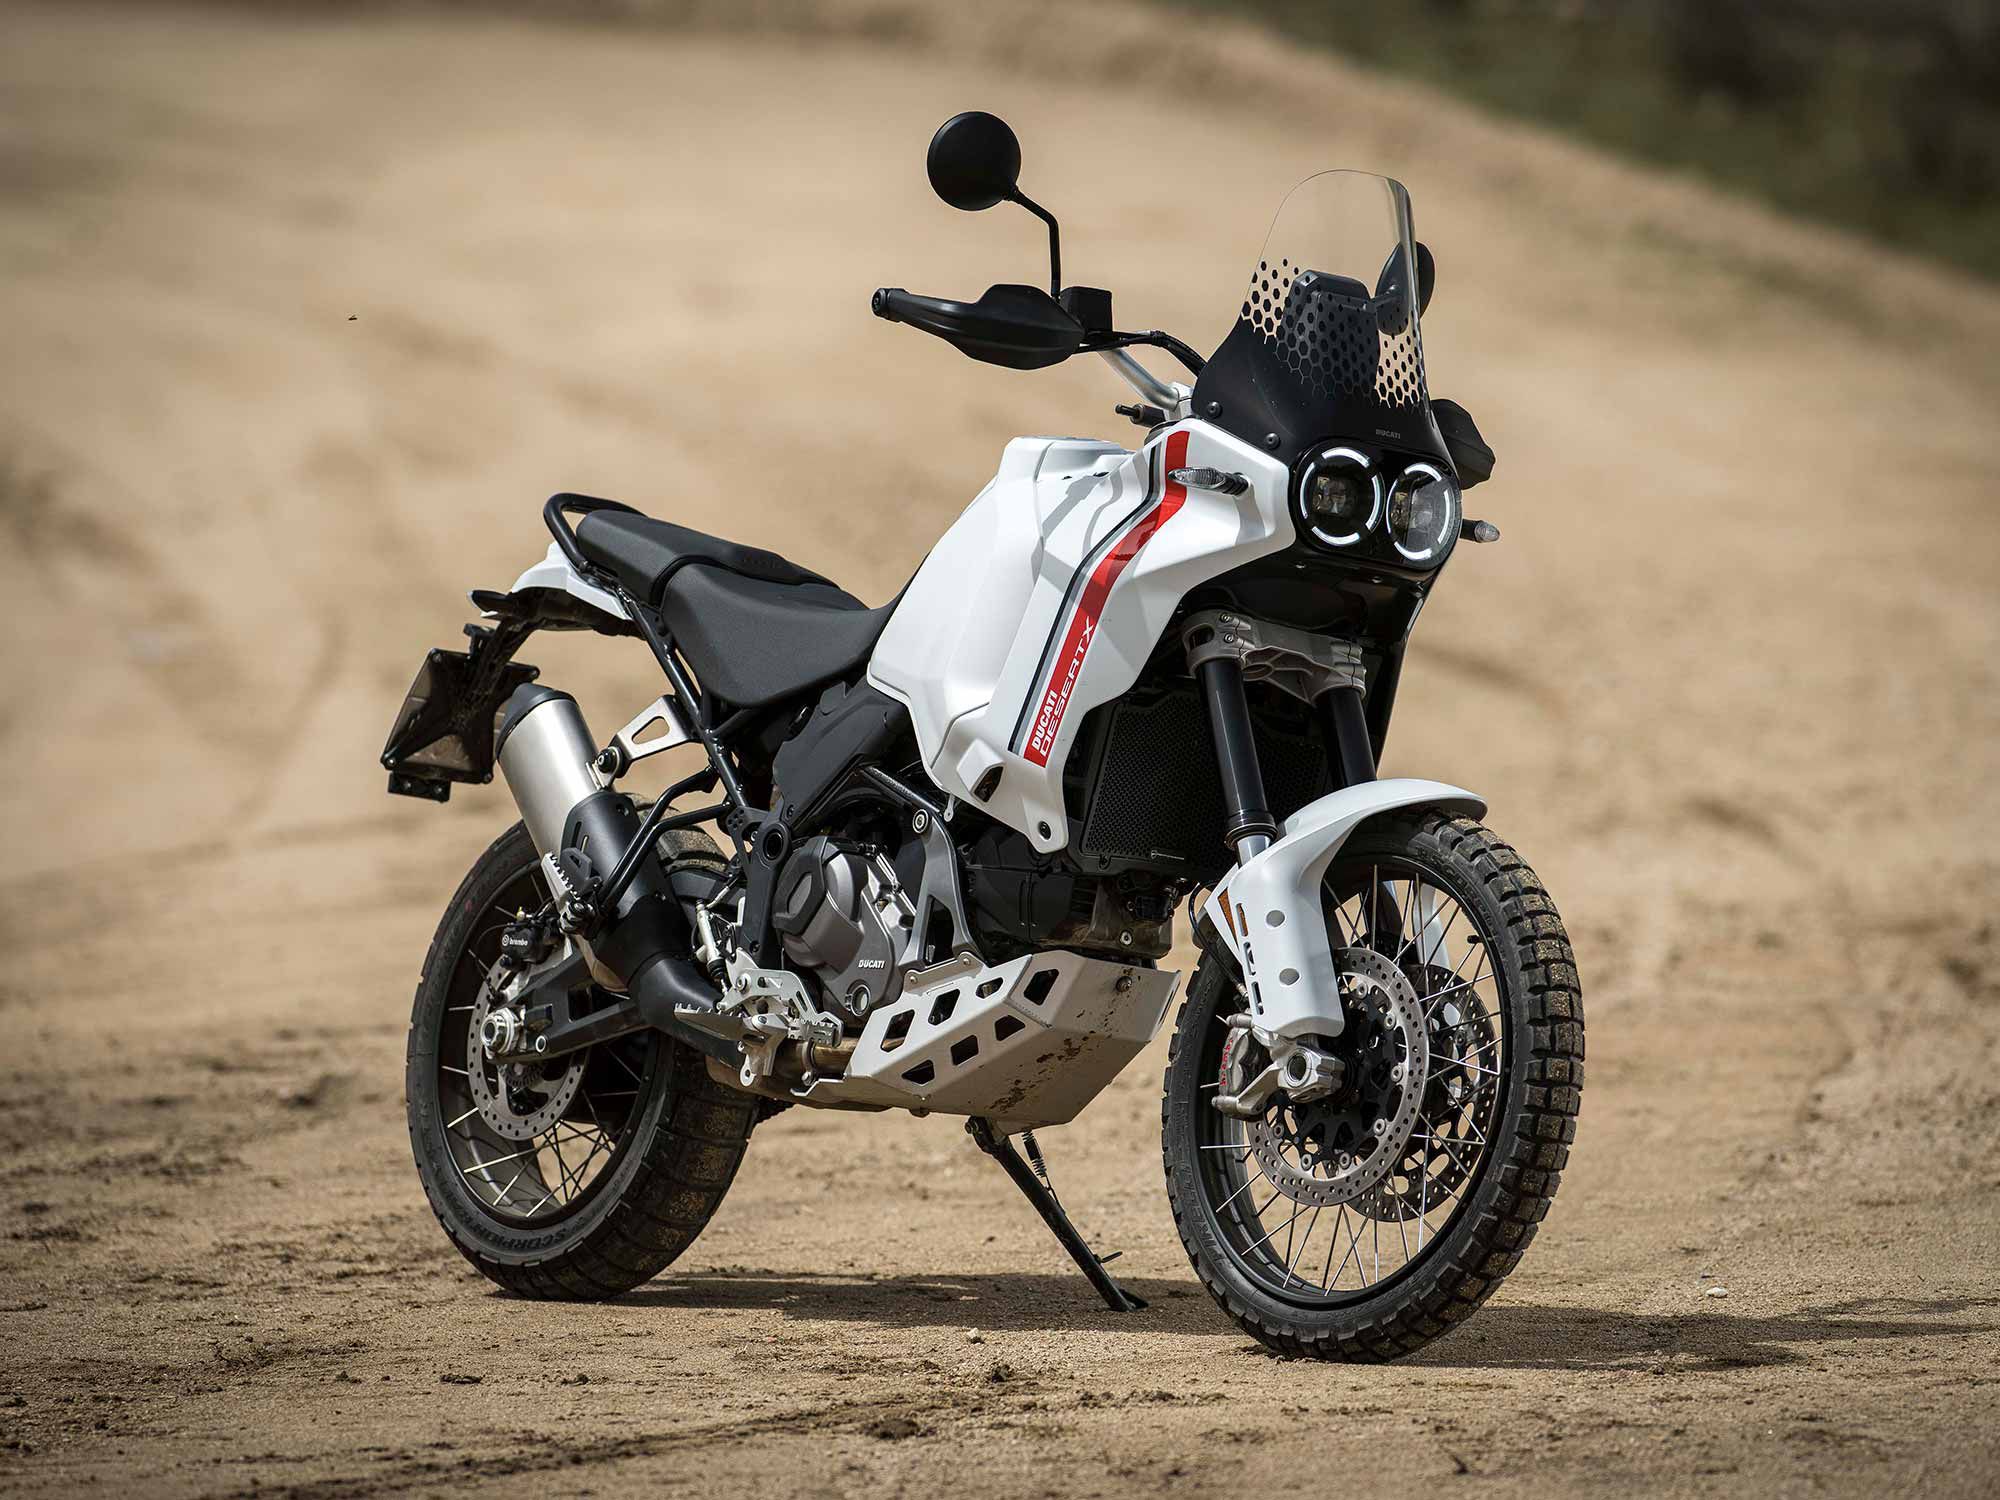 Ducati never won the Dakar, although its engines did in 1990 and 1994 with Cagiva, and the new DesertX is clearly inspired by the old-school Dakar icons.